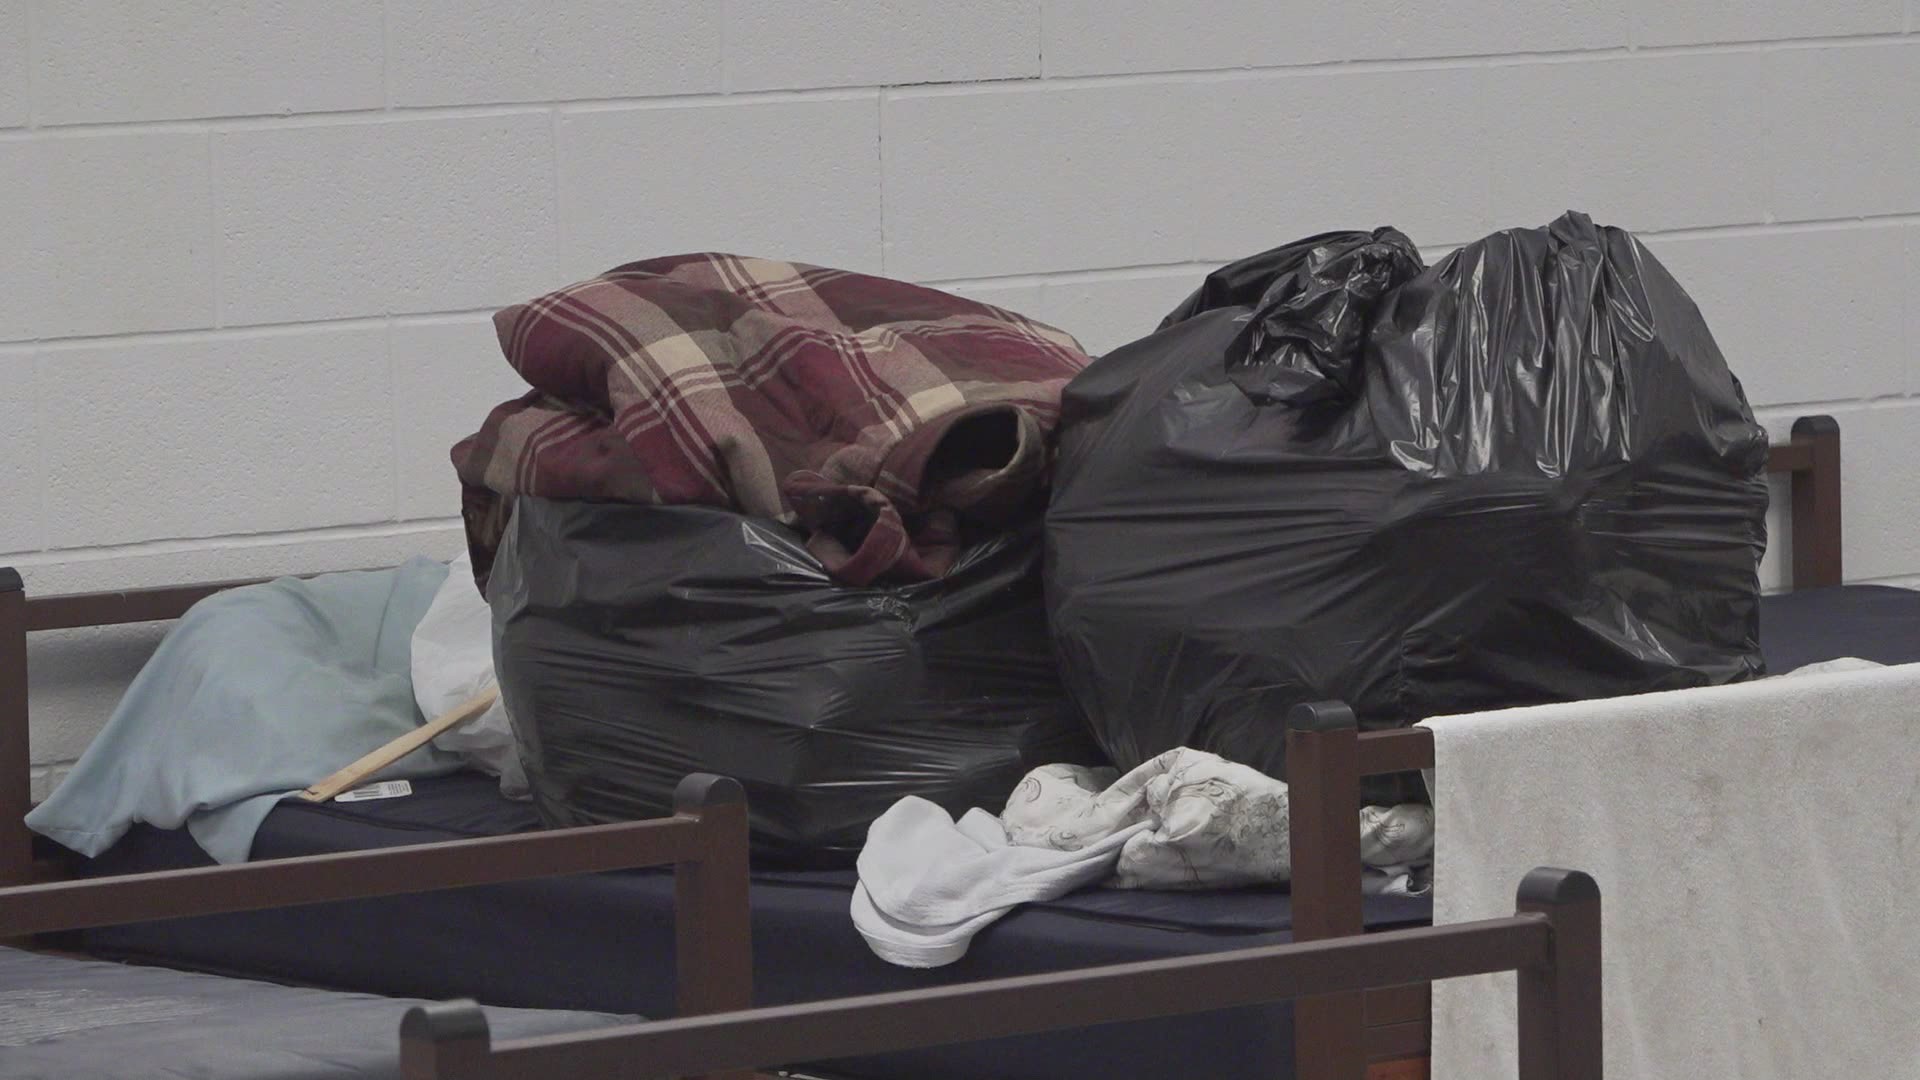 San Angelo's Salvation Army temporarily closes shelter for renovations, lack of funds. Staff says it will reopen the shelter in approximately four months.